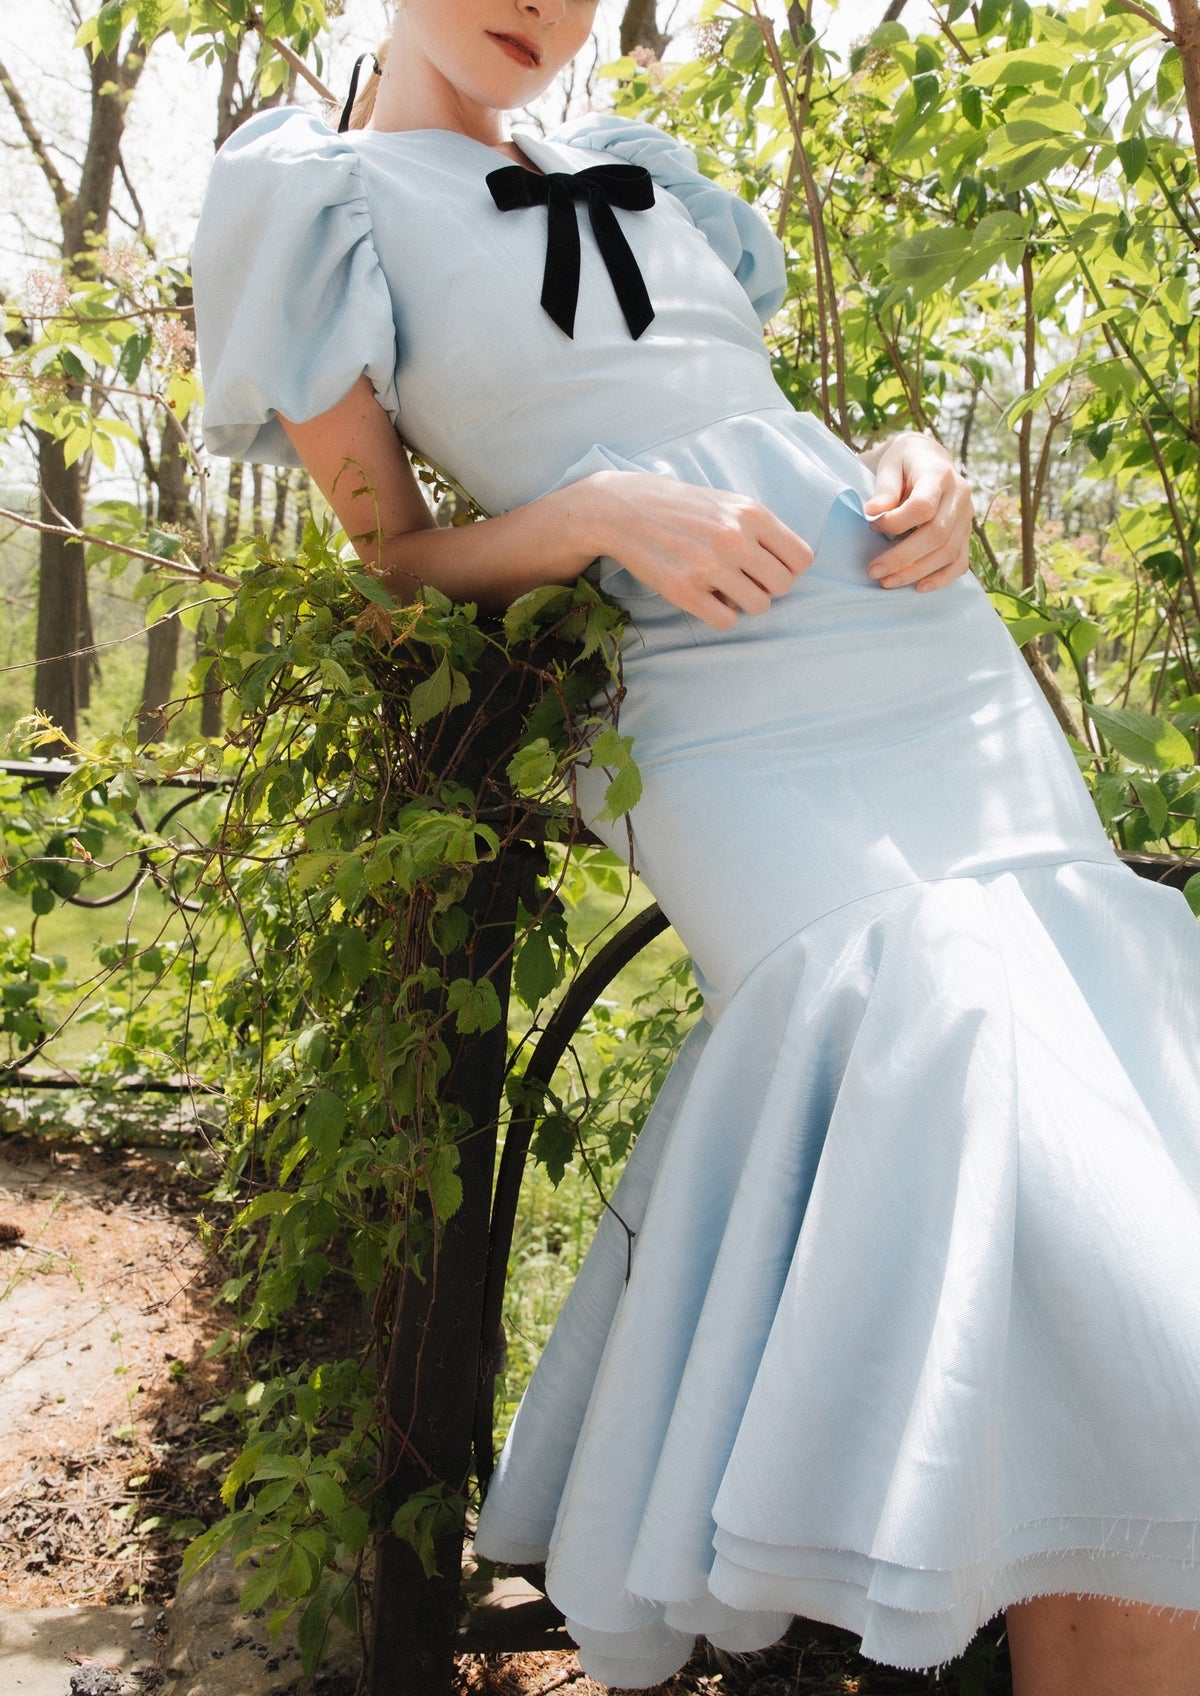 OTM Exclusive: Diana Skirt in Blue Moire